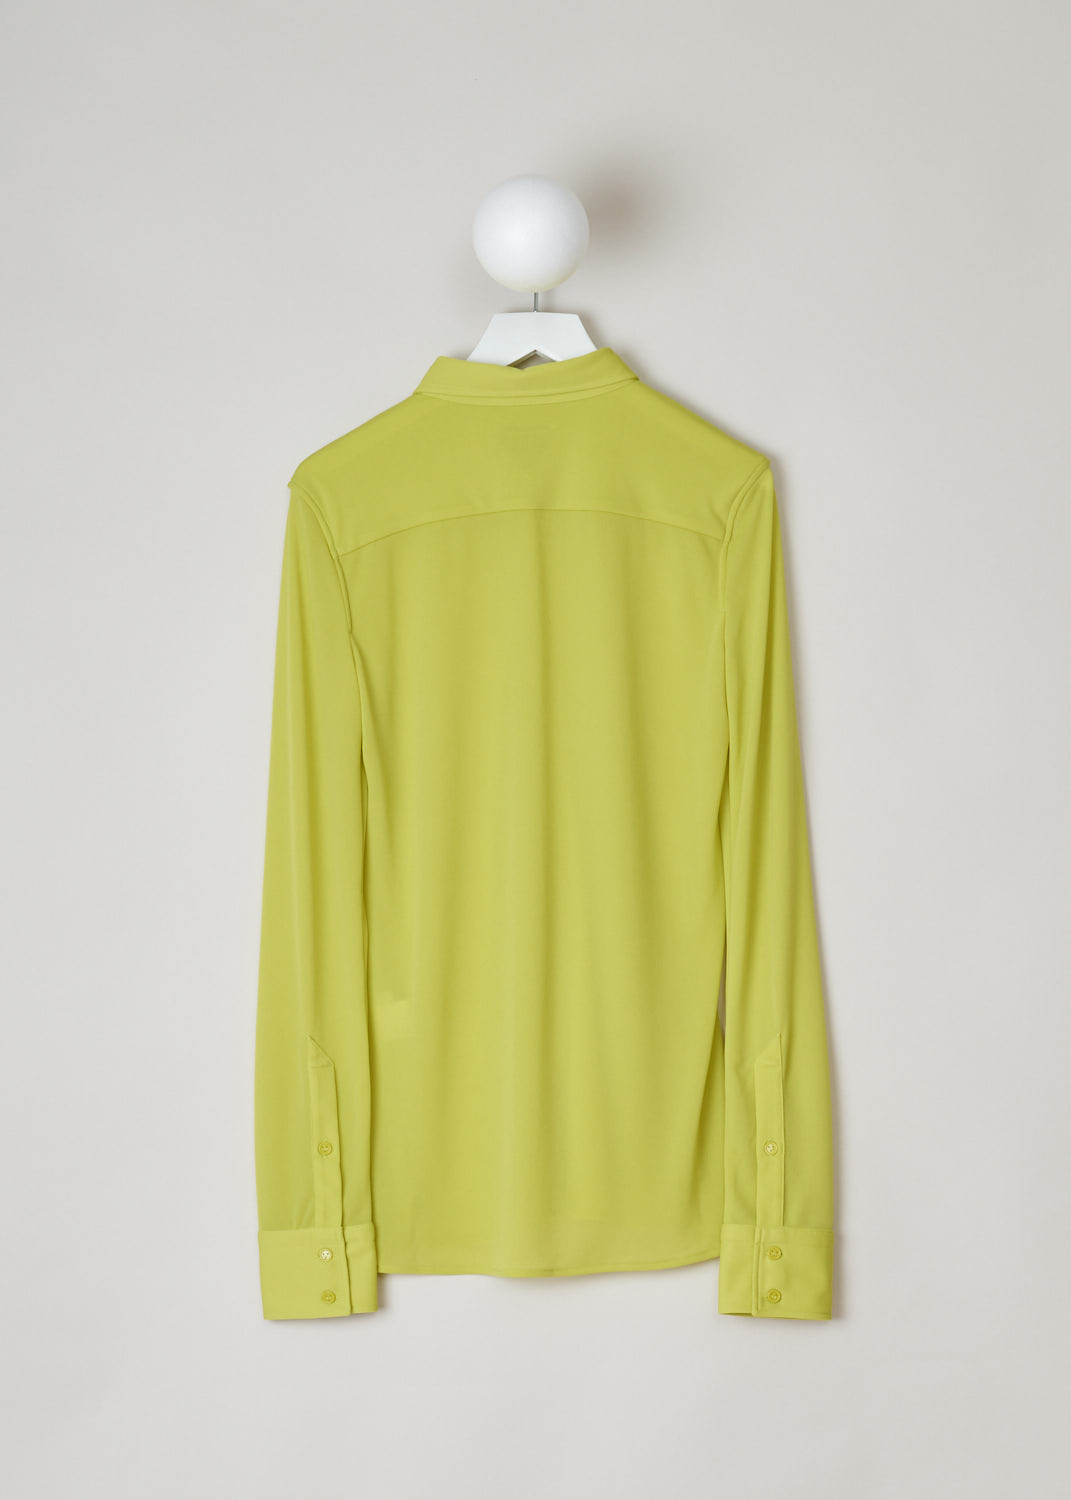 Bottega Veneta, See through yellow blouse, 636591_V0210_7275, yellow, back, Designed with a oversized fit in mind. Featuring a pointed collar, long cuffed sleeves with three buttons on them. And a straight hem with two short splits on the side seam. Keep in mind that the fabric is slightly see through.